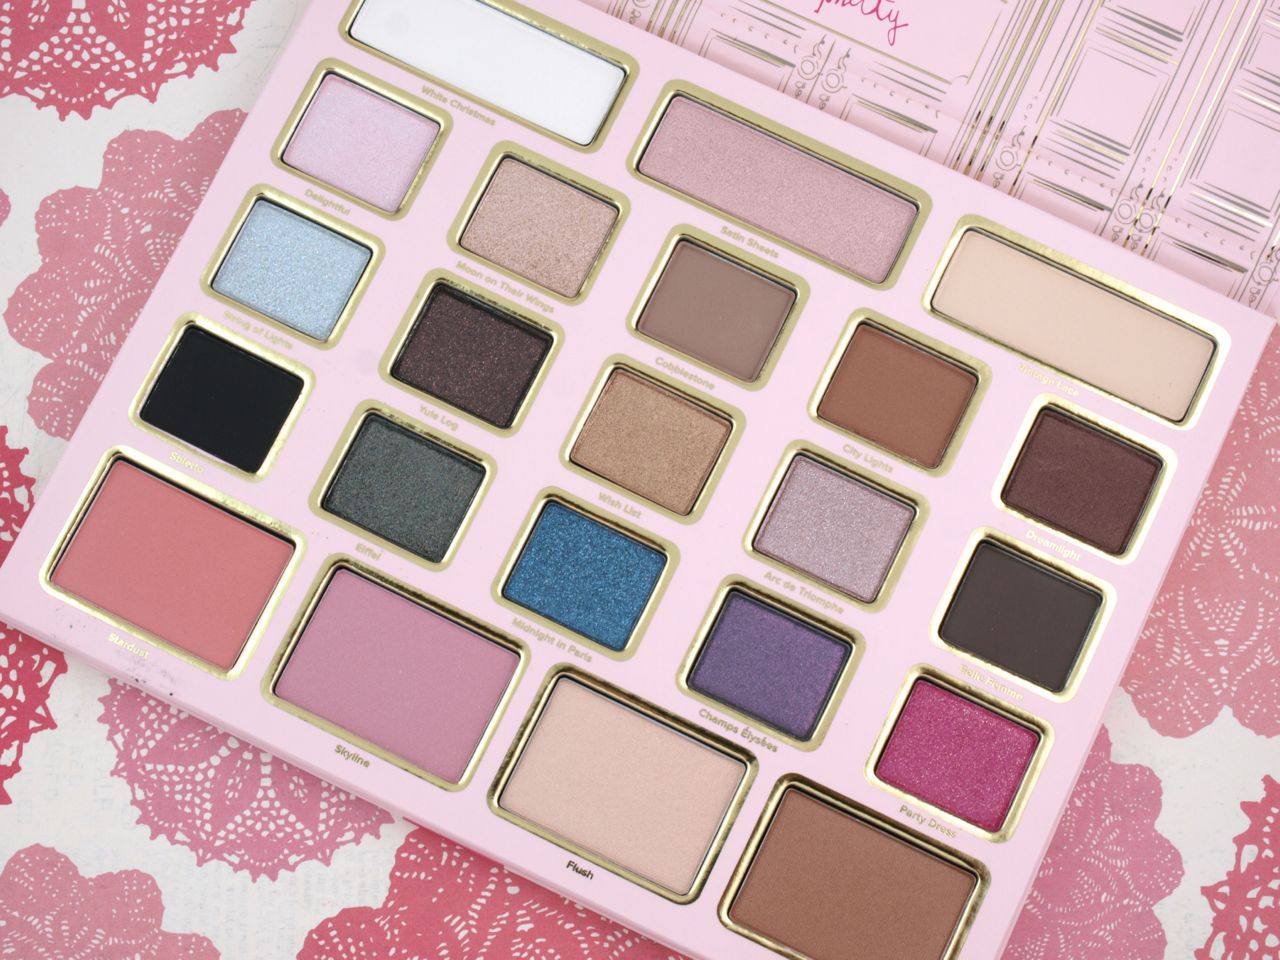 Too Faced Holiday 2015 Le Grand Palais Collection: Review and Swatches